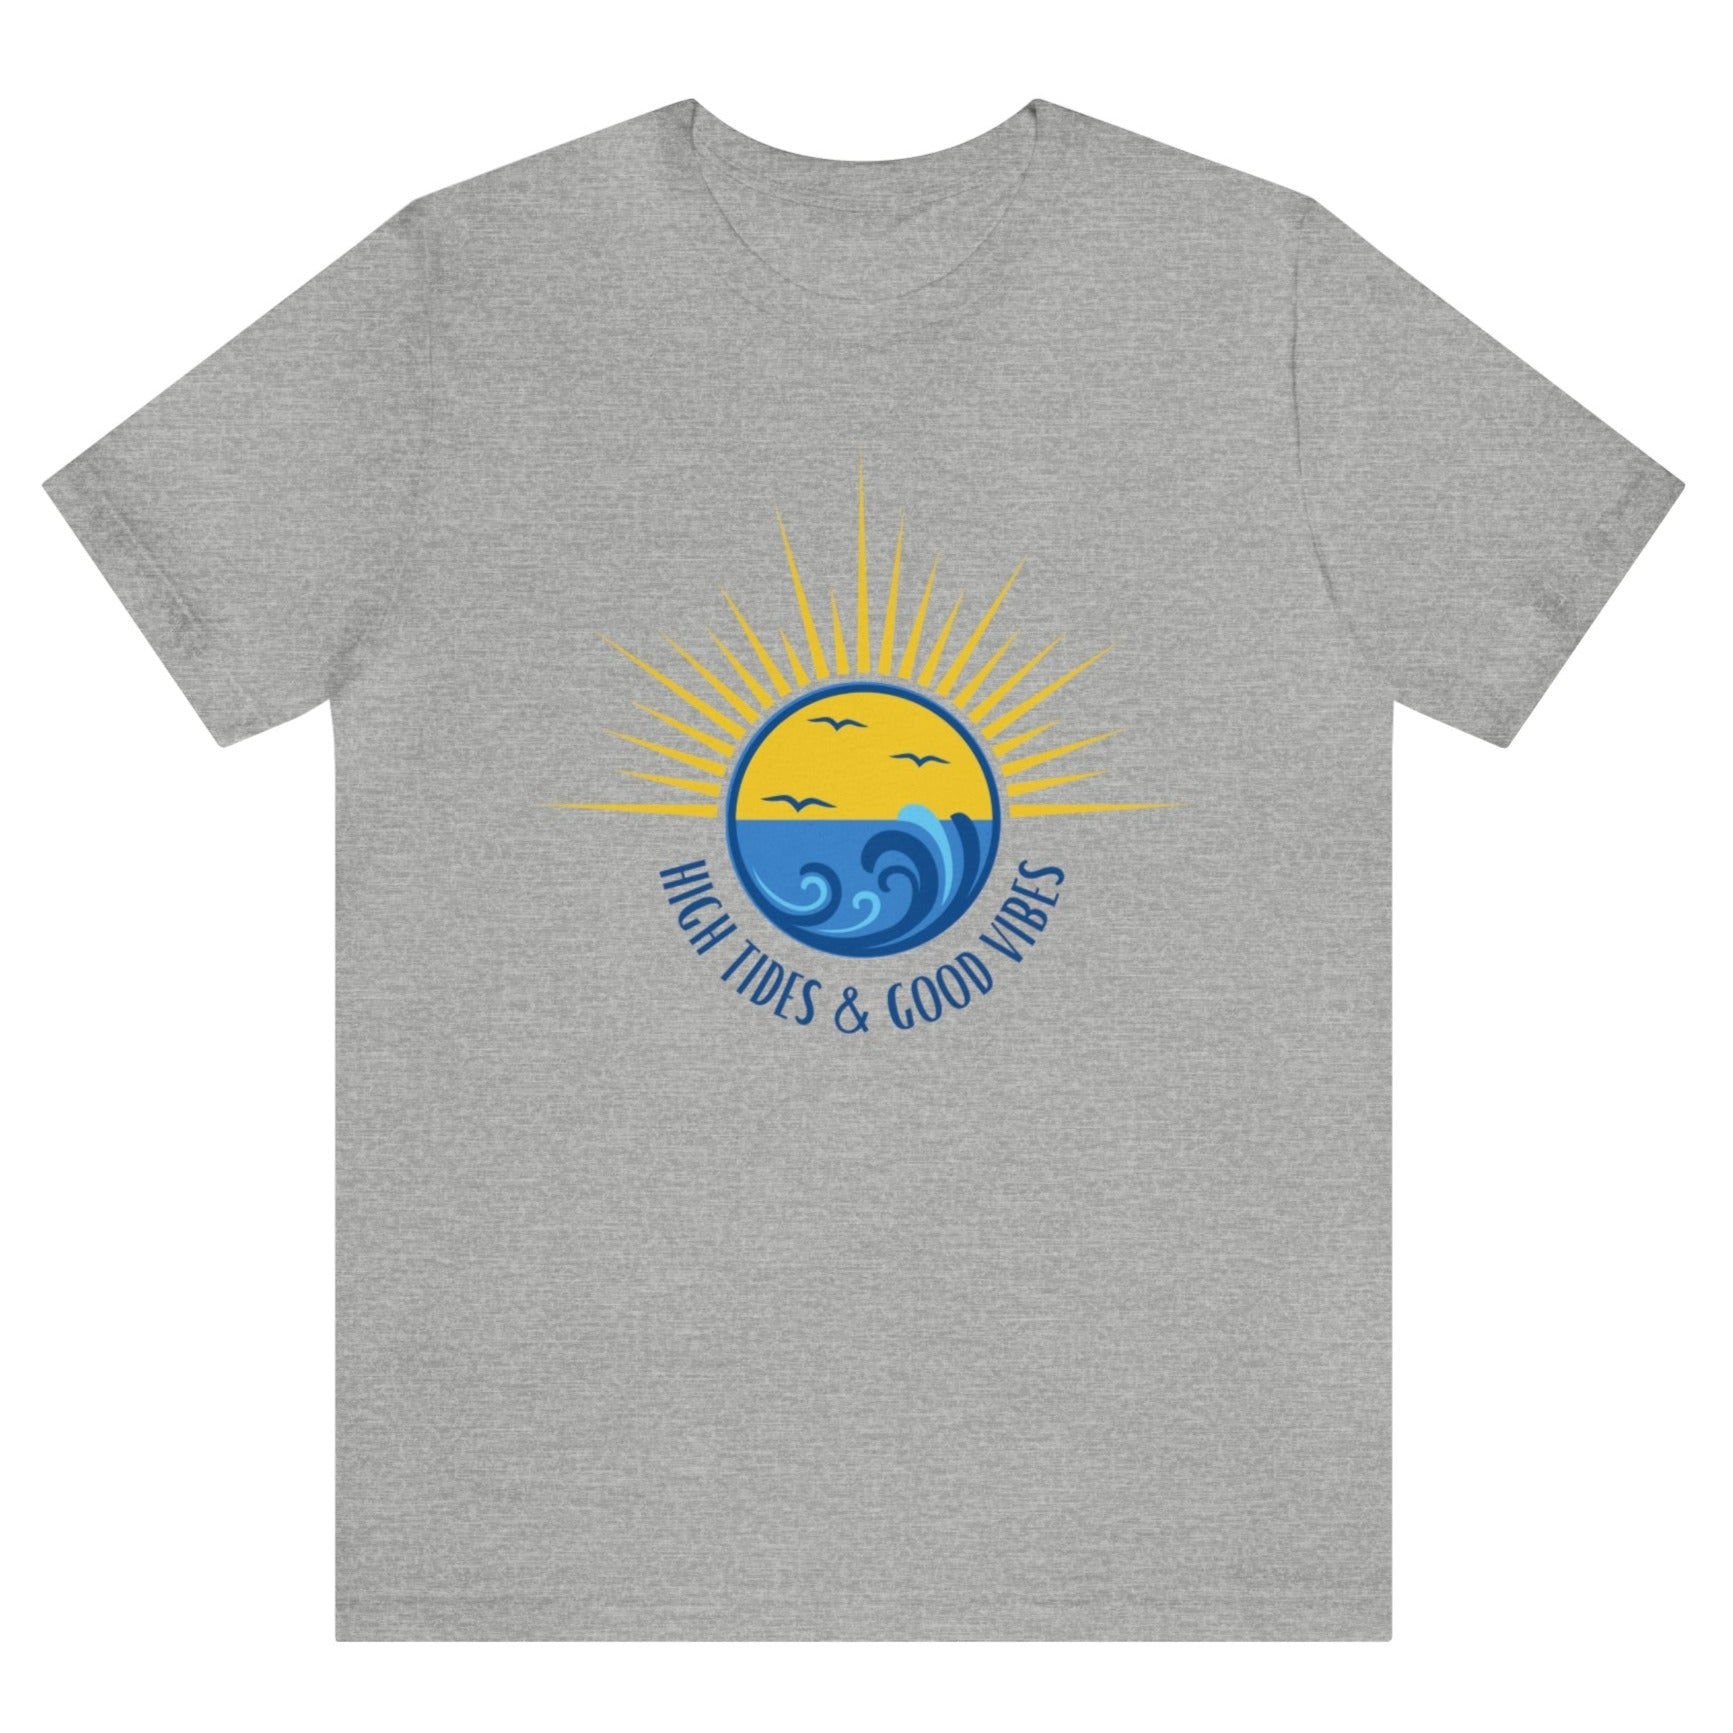 high-tides-and-good-vibes-athletic-heather-t-shirt-beach-sunset-unisex